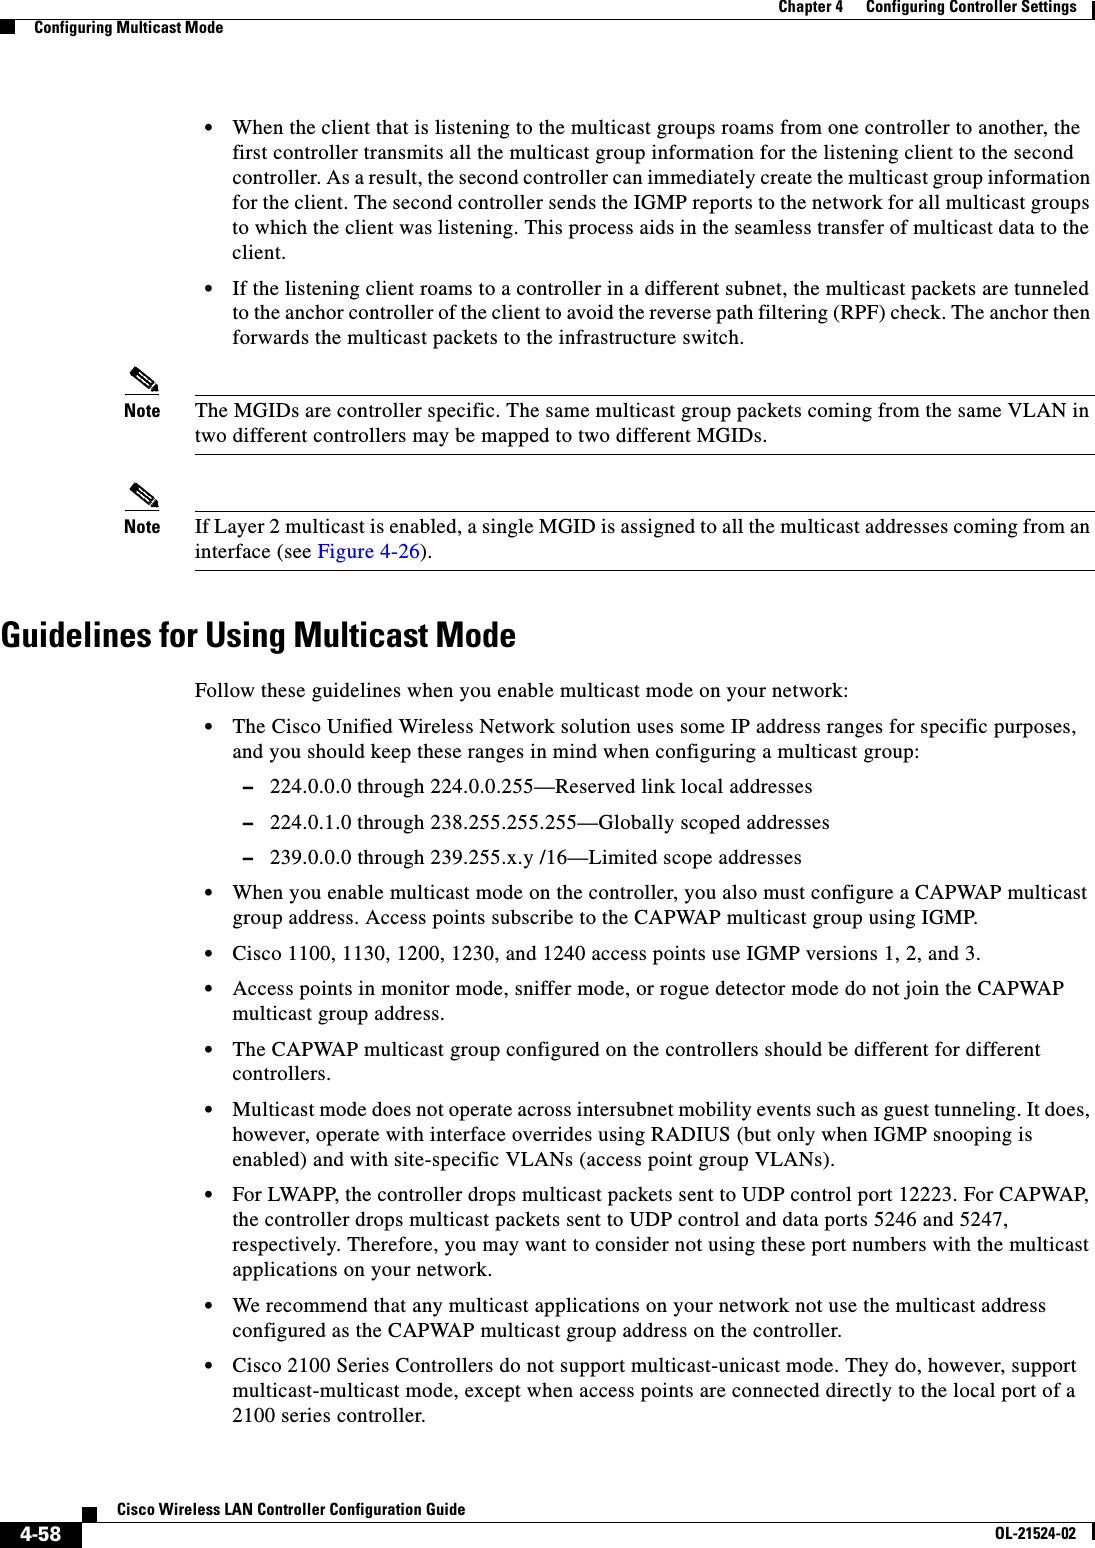  4-58Cisco Wireless LAN Controller Configuration GuideOL-21524-02Chapter 4      Configuring Controller SettingsConfiguring Multicast Mode  • When the client that is listening to the multicast groups roams from one controller to another, the first controller transmits all the multicast group information for the listening client to the second controller. As a result, the second controller can immediately create the multicast group information for the client. The second controller sends the IGMP reports to the network for all multicast groups to which the client was listening. This process aids in the seamless transfer of multicast data to the client.  • If the listening client roams to a controller in a different subnet, the multicast packets are tunneled to the anchor controller of the client to avoid the reverse path filtering (RPF) check. The anchor then forwards the multicast packets to the infrastructure switch.Note The MGIDs are controller specific. The same multicast group packets coming from the same VLAN in two different controllers may be mapped to two different MGIDs.Note If Layer 2 multicast is enabled, a single MGID is assigned to all the multicast addresses coming from an interface (see Figure 4-26).Guidelines for Using Multicast ModeFollow these guidelines when you enable multicast mode on your network:  • The Cisco Unified Wireless Network solution uses some IP address ranges for specific purposes, and you should keep these ranges in mind when configuring a multicast group:  –224.0.0.0 through 224.0.0.255—Reserved link local addresses  –224.0.1.0 through 238.255.255.255—Globally scoped addresses  –239.0.0.0 through 239.255.x.y /16—Limited scope addresses  • When you enable multicast mode on the controller, you also must configure a CAPWAP multicast group address. Access points subscribe to the CAPWAP multicast group using IGMP.  • Cisco 1100, 1130, 1200, 1230, and 1240 access points use IGMP versions 1, 2, and 3.  • Access points in monitor mode, sniffer mode, or rogue detector mode do not join the CAPWAP multicast group address.  • The CAPWAP multicast group configured on the controllers should be different for different controllers.  • Multicast mode does not operate across intersubnet mobility events such as guest tunneling. It does, however, operate with interface overrides using RADIUS (but only when IGMP snooping is enabled) and with site-specific VLANs (access point group VLANs).  • For LWAPP, the controller drops multicast packets sent to UDP control port 12223. For CAPWAP, the controller drops multicast packets sent to UDP control and data ports 5246 and 5247, respectively. Therefore, you may want to consider not using these port numbers with the multicast applications on your network.  • We recommend that any multicast applications on your network not use the multicast address configured as the CAPWAP multicast group address on the controller.  • Cisco 2100 Series Controllers do not support multicast-unicast mode. They do, however, support multicast-multicast mode, except when access points are connected directly to the local port of a 2100 series controller.